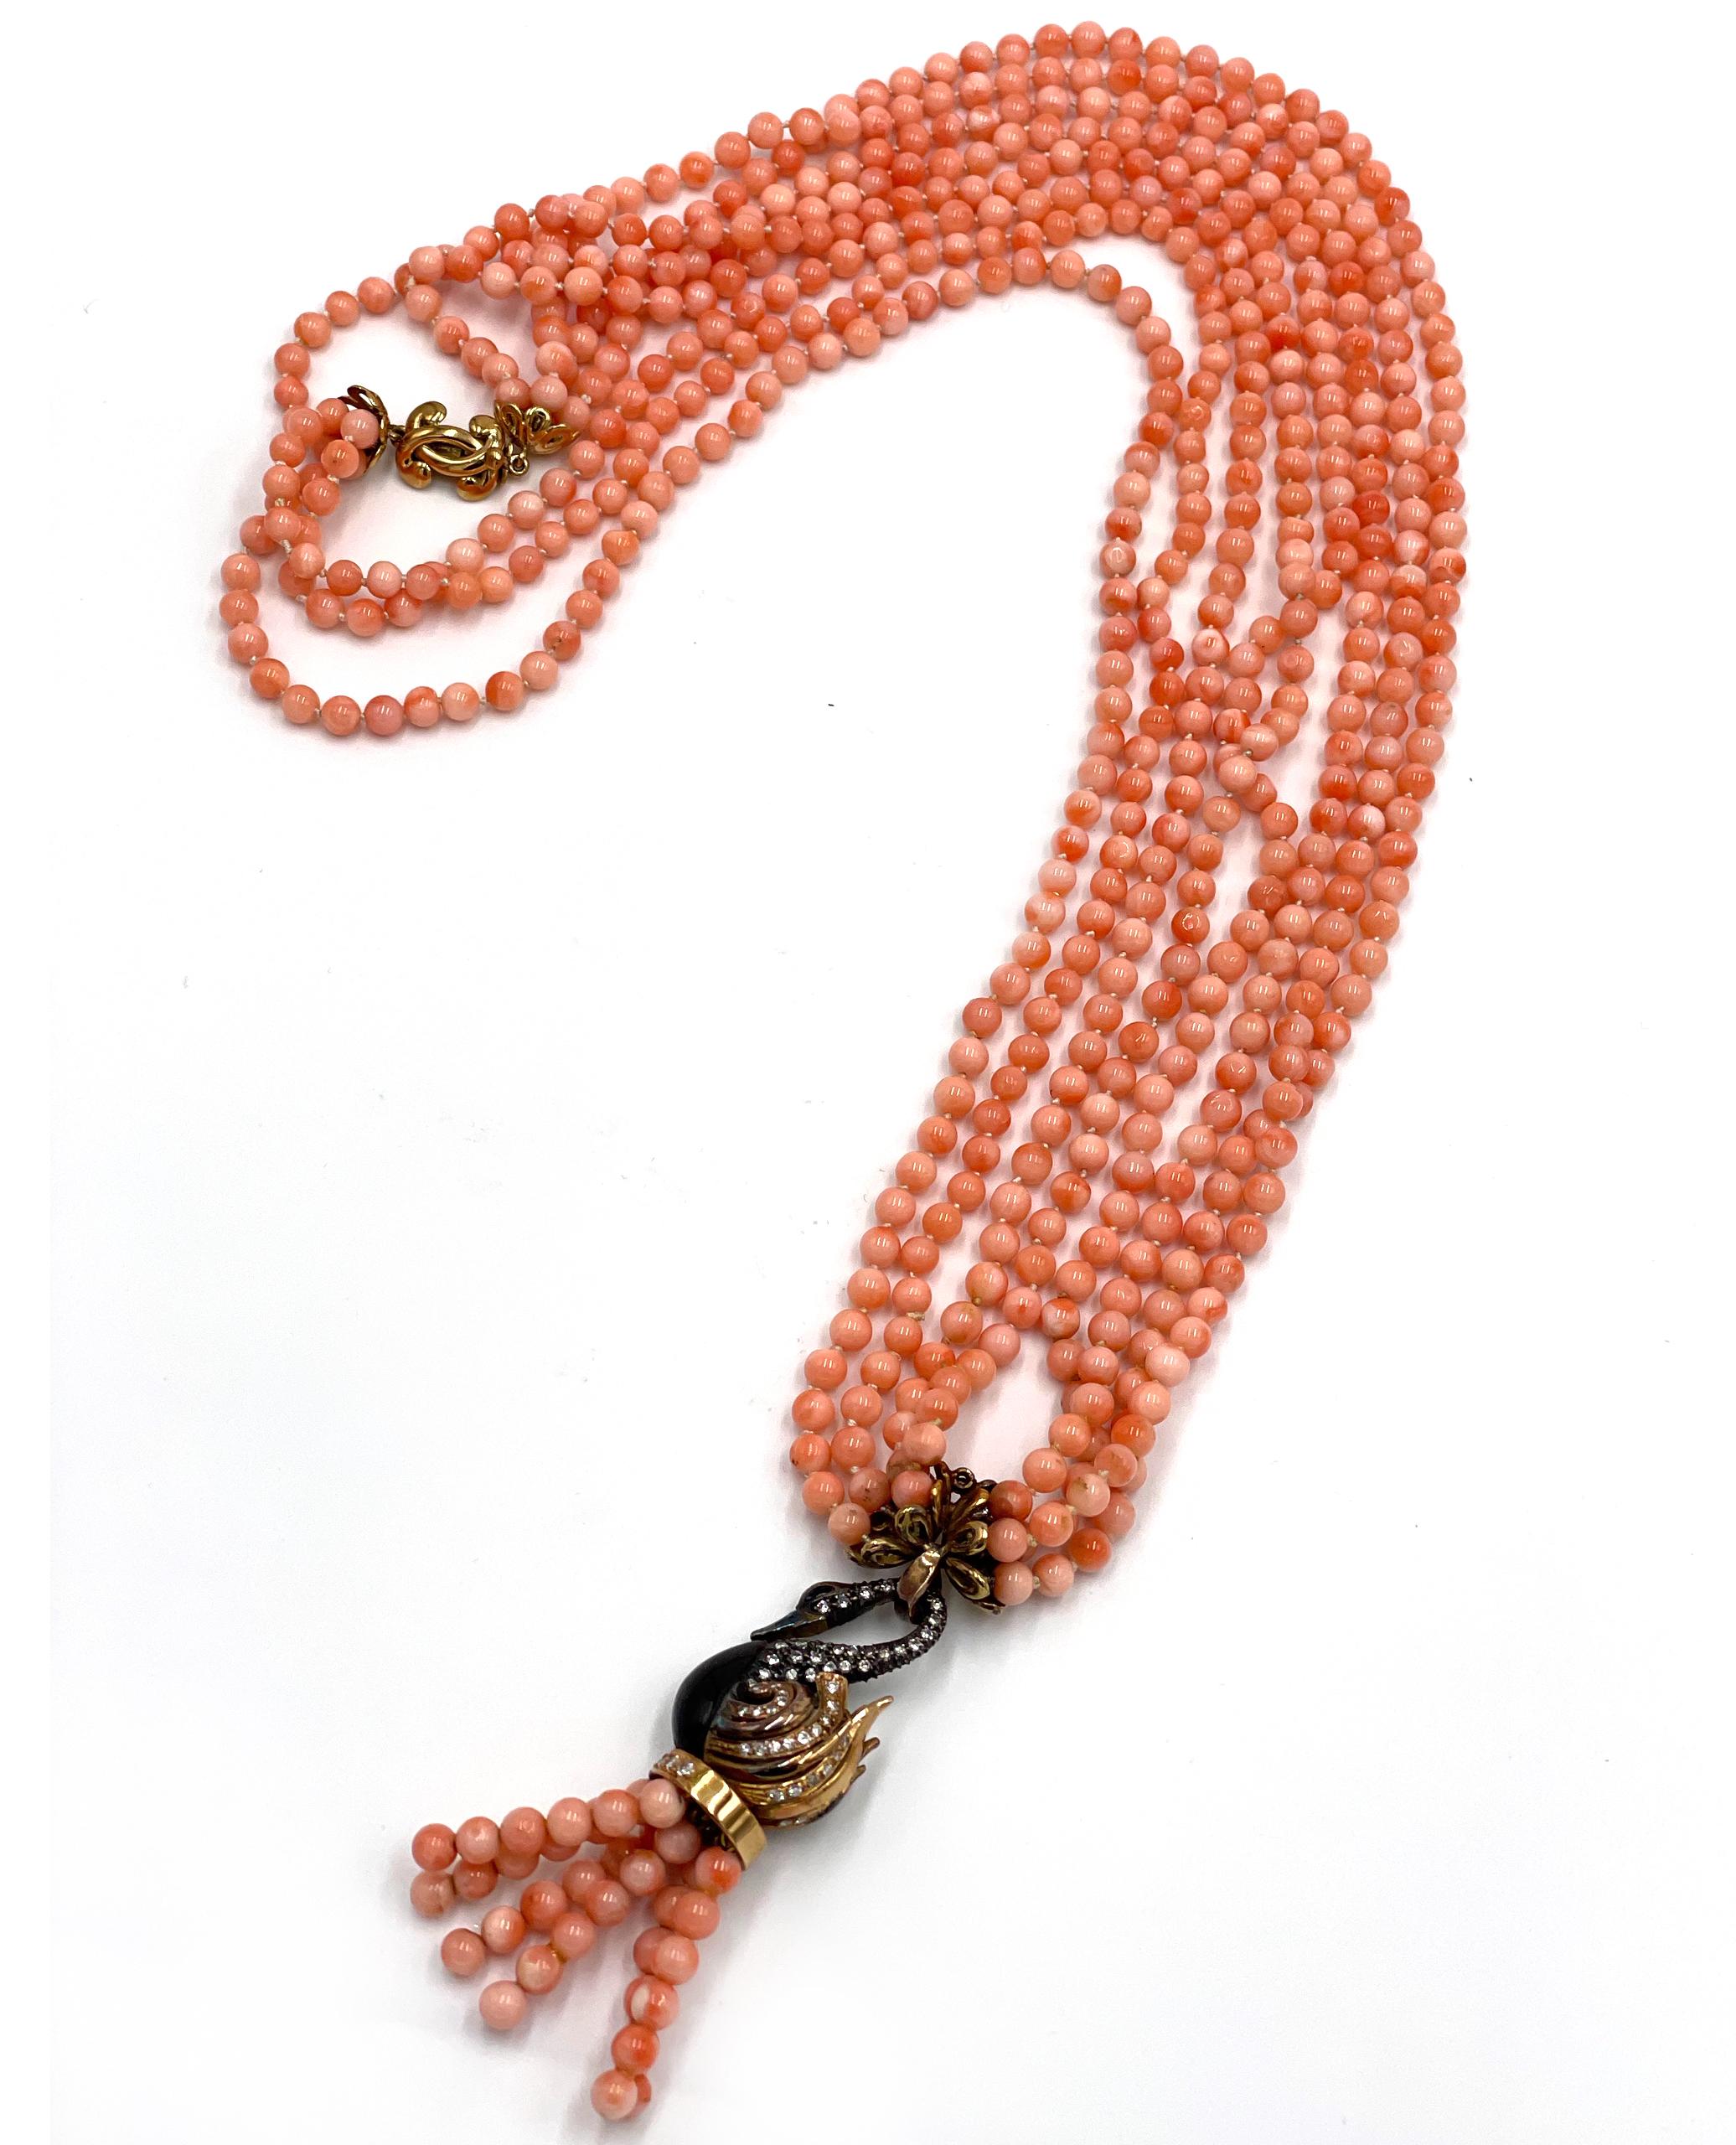 Pre owned vintage esatate 18K yellow gold diamond and angel coral bead tassel necklace.  The necklace has four strands of light orange/pink coral beads ranging from 4.5-4.7mm.
The beads suspend an 18k yellow and black onyx swan that is embellished